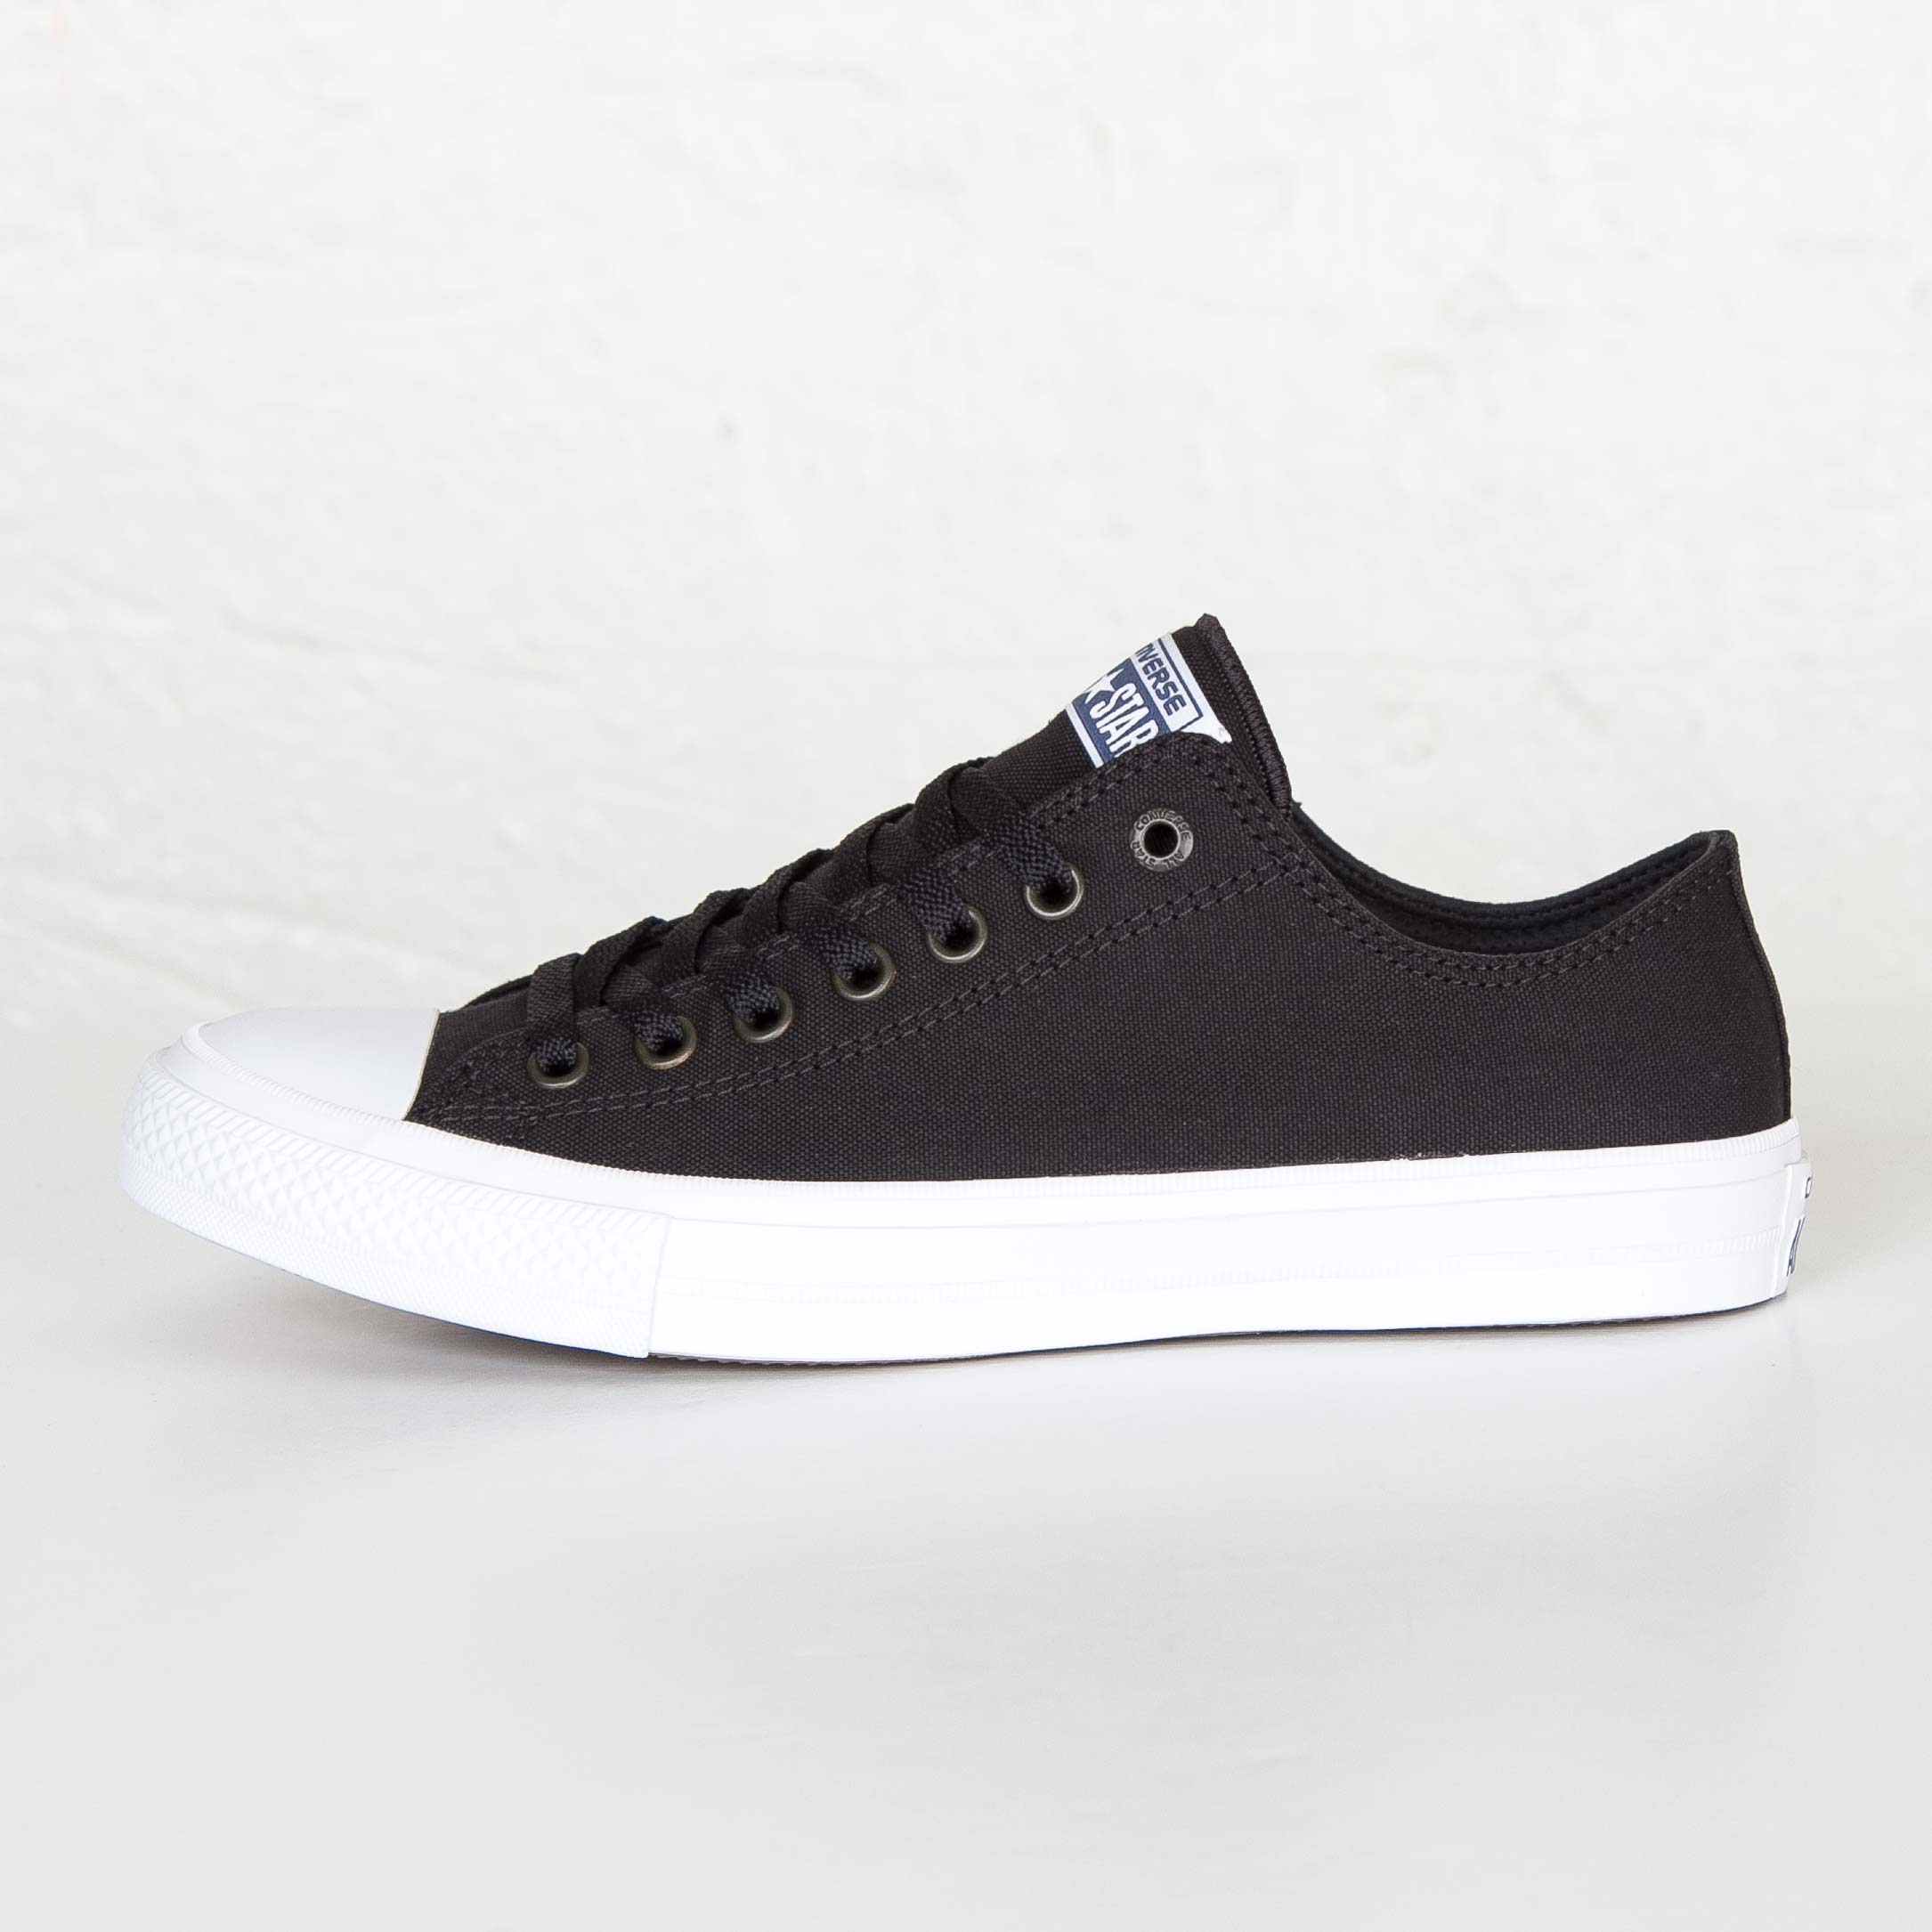 Converse Chuck Taylor Star II OX Low Top Black – PRIVATE SNEAKERS